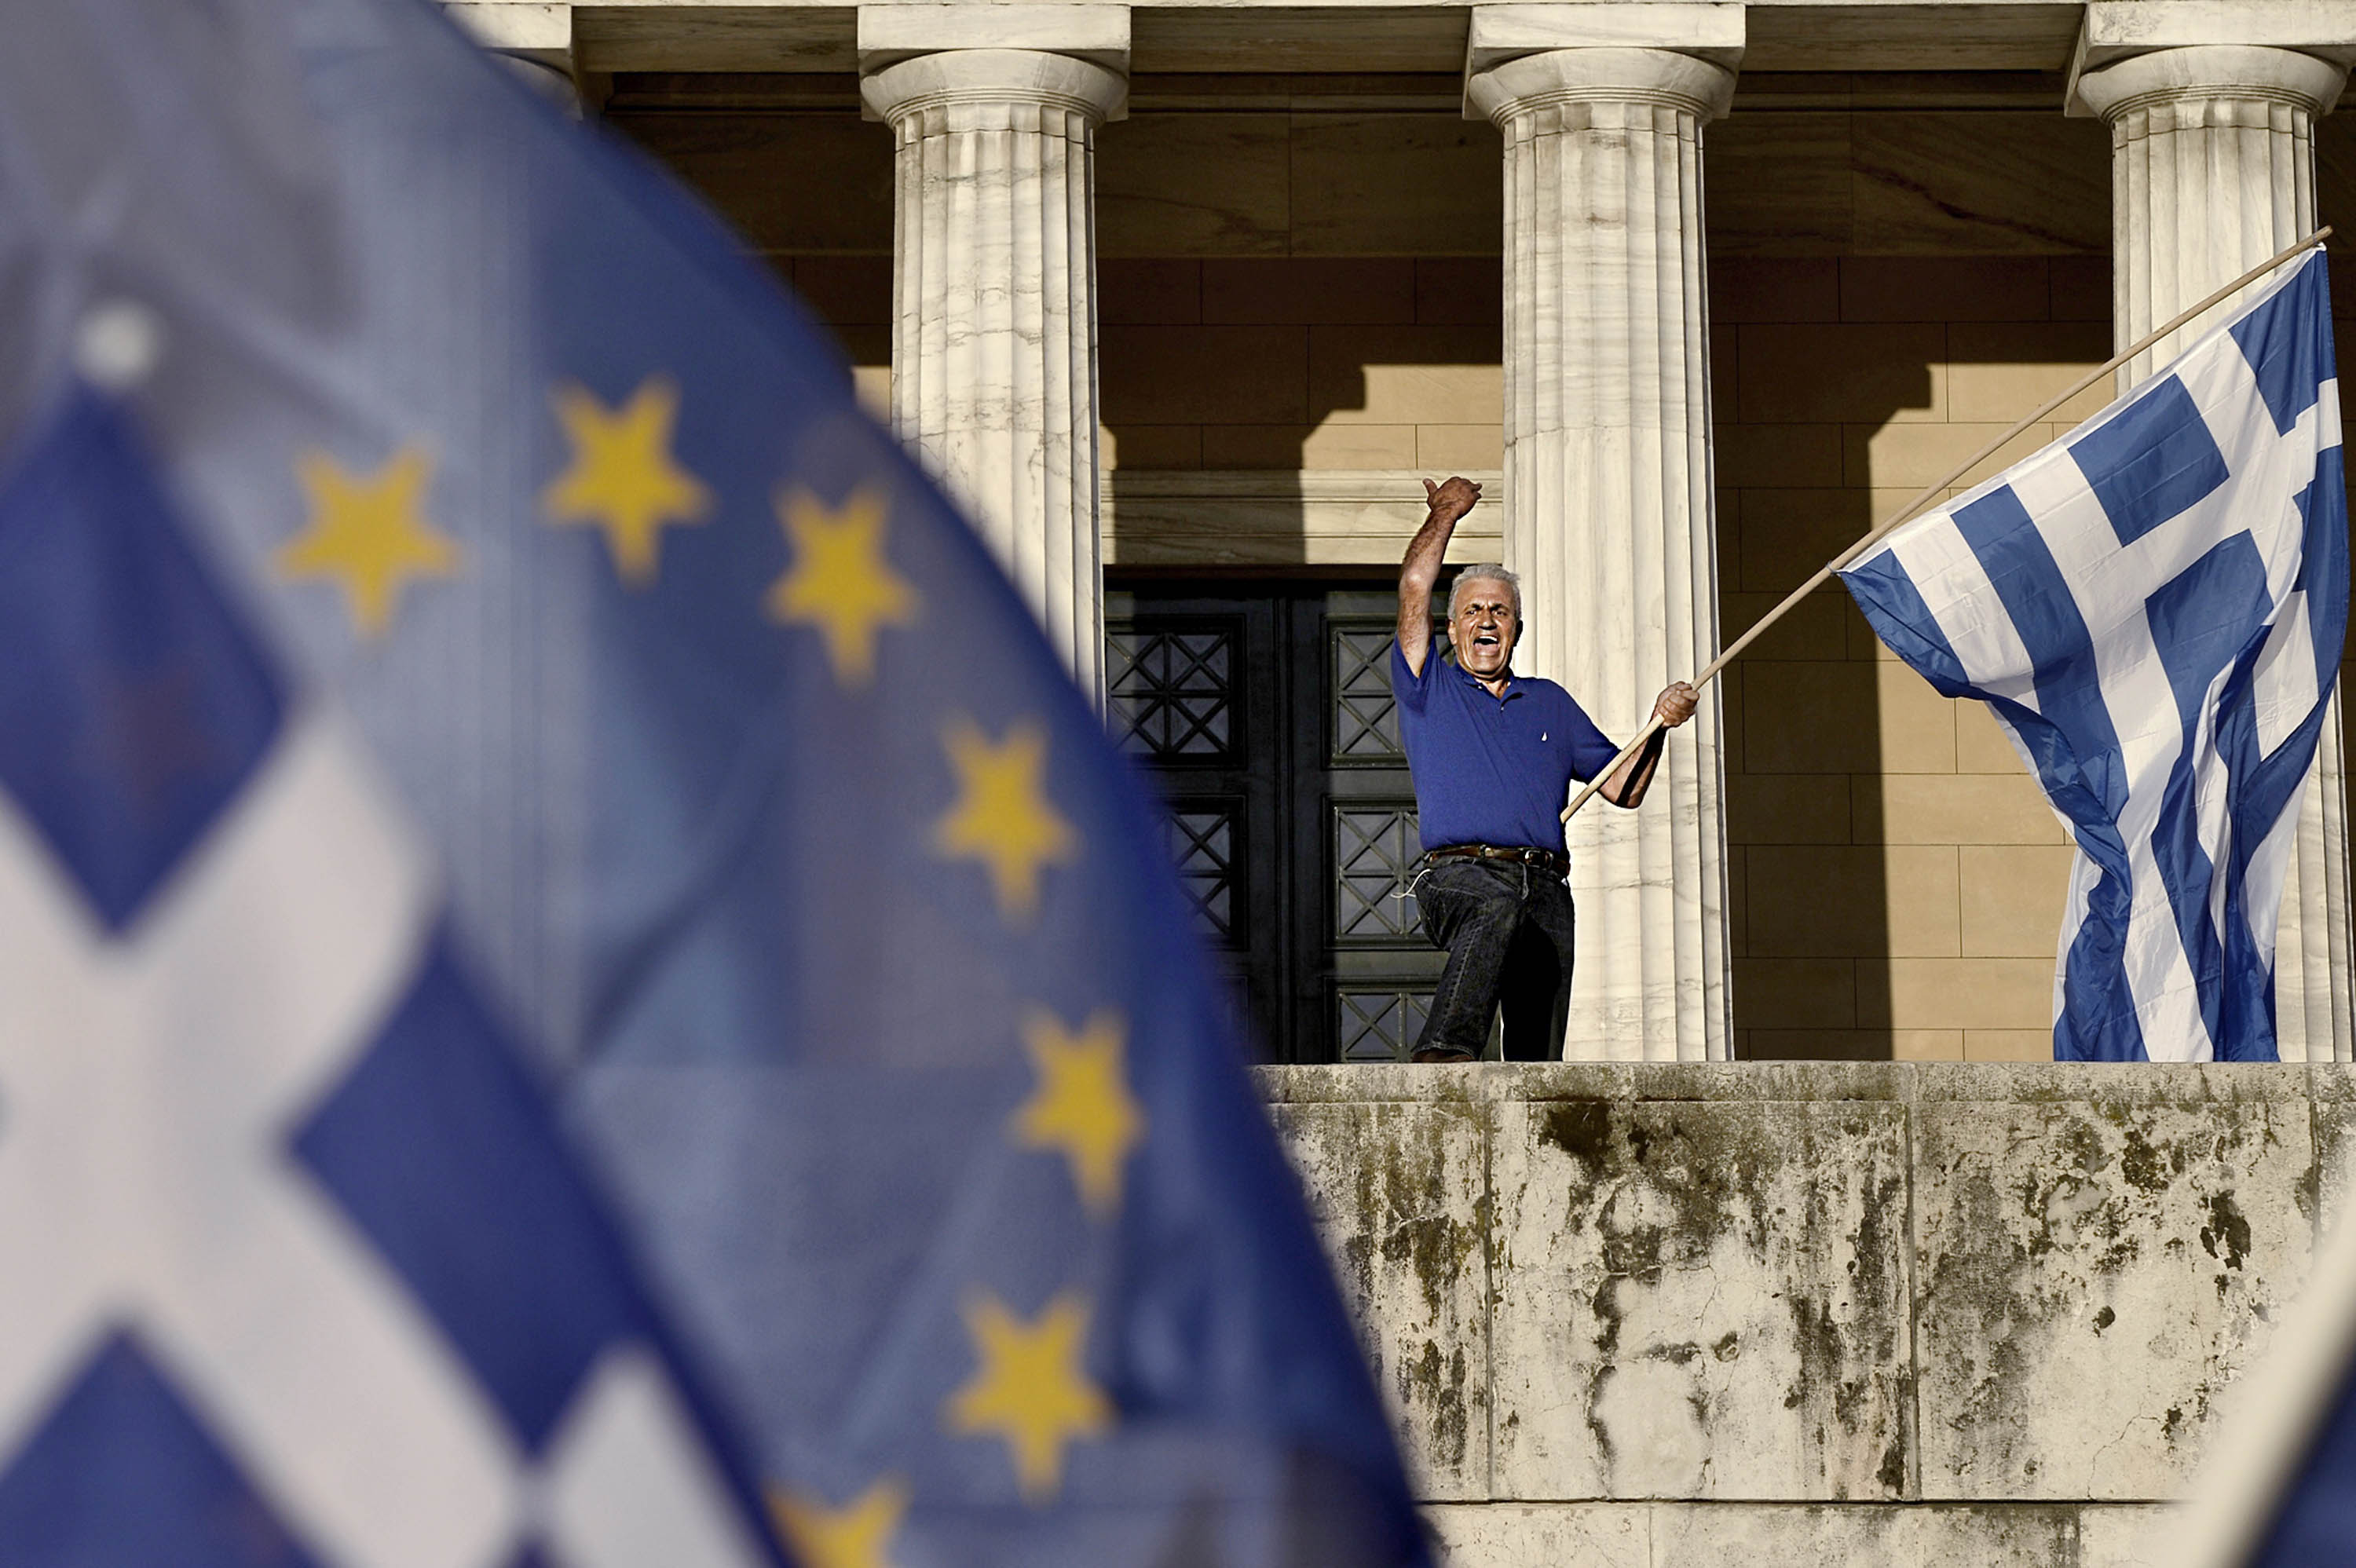 A protester at a pro-European demonstration in Athens. (Aris Messinis—AFP/Getty Images)